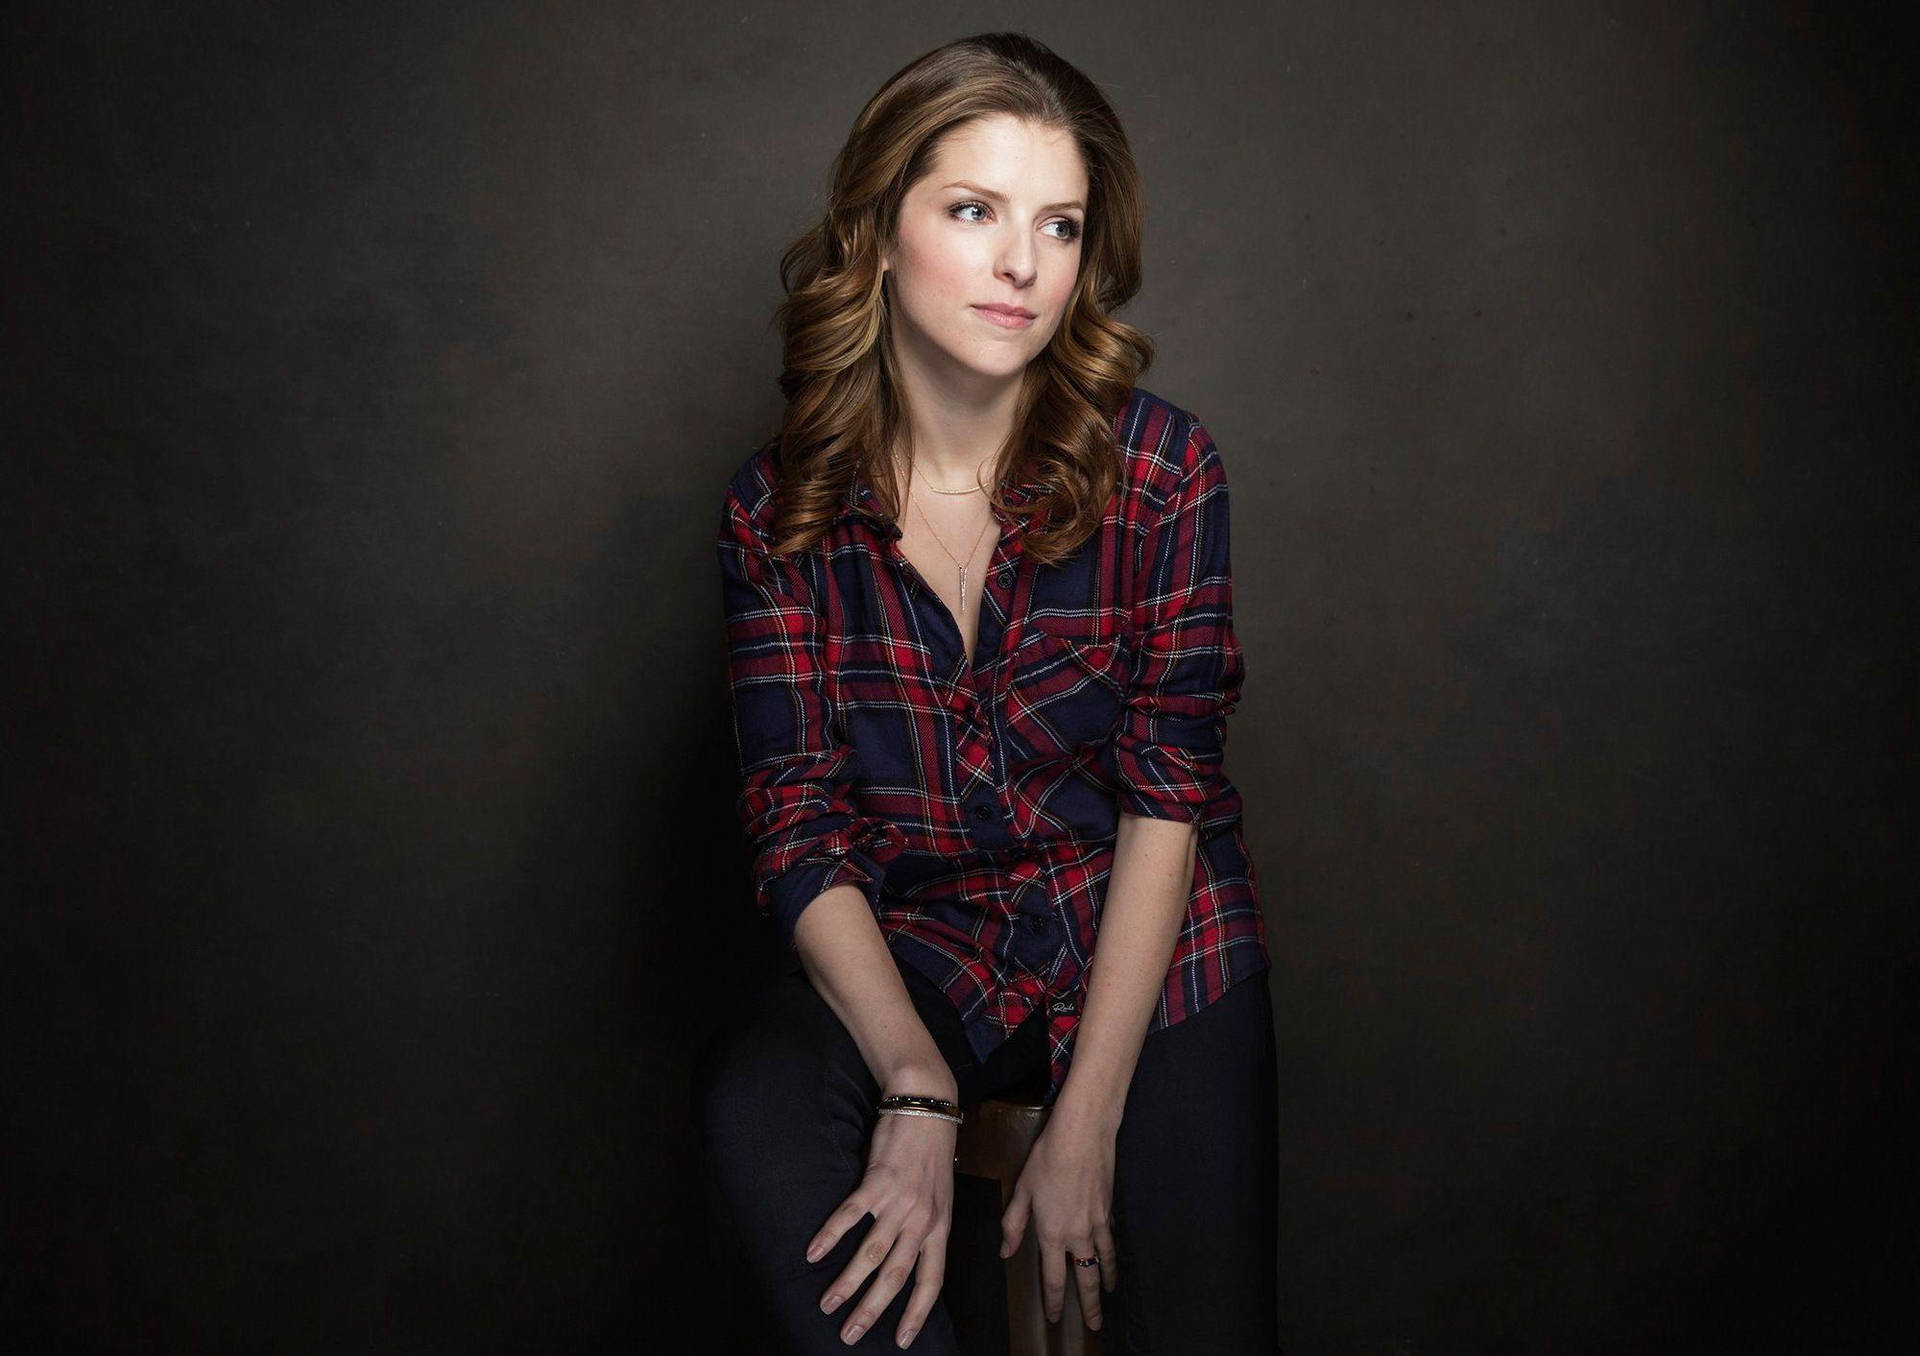 Hollywood Actress Anna Kendrick In Plaid Shirt Background